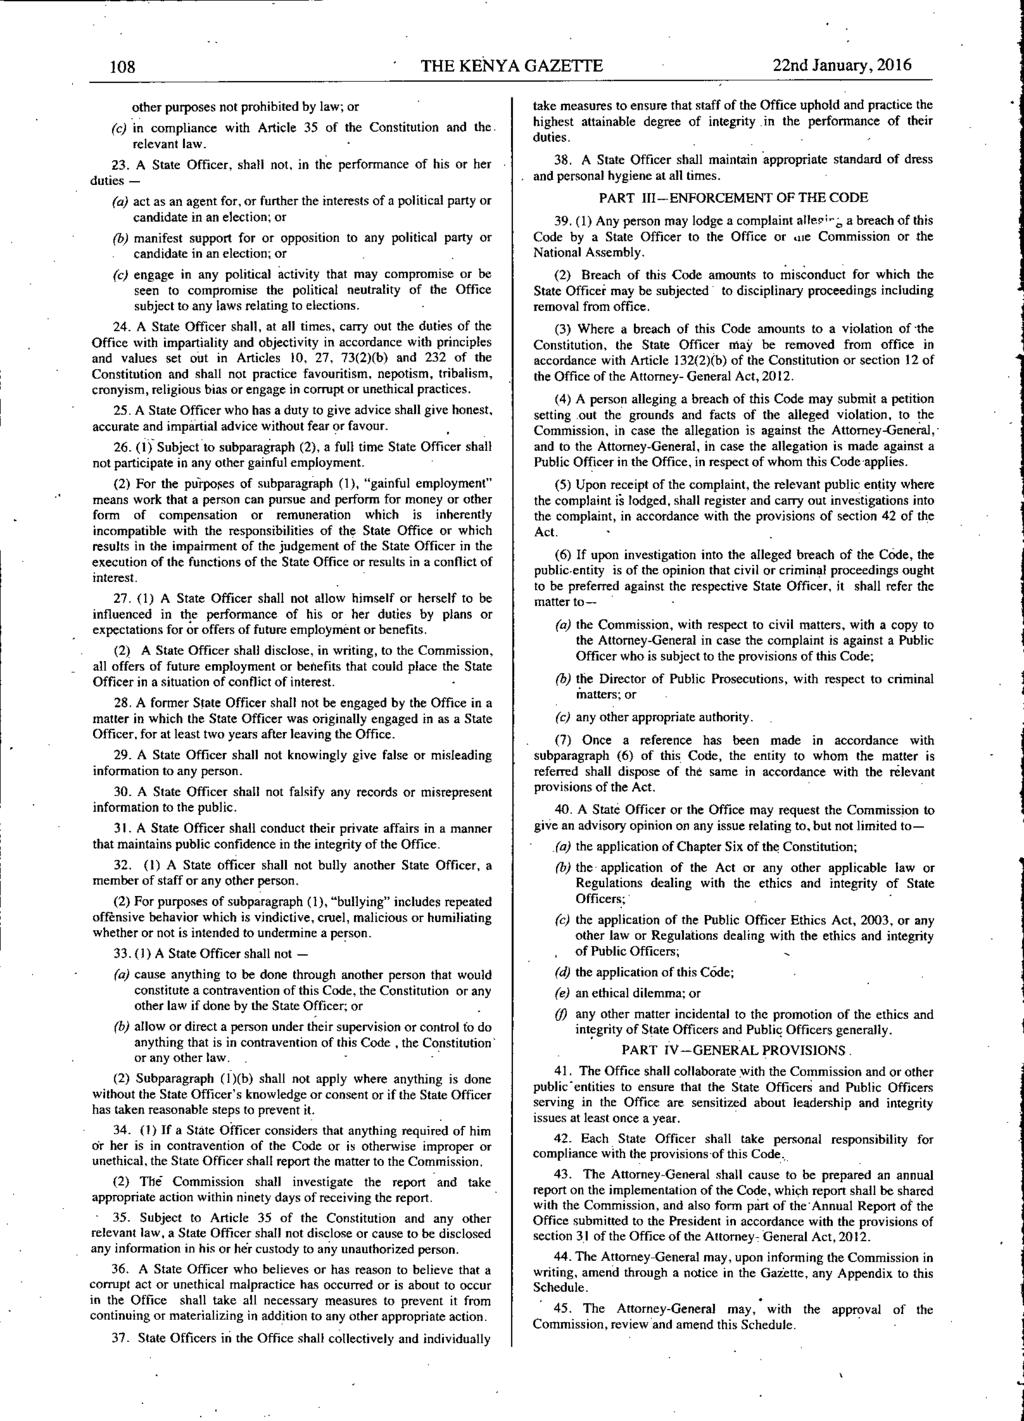 18. THE KENYA GAZETTE 22nd January, 216 other purposes not prohibited by law; or (c) in compliance with Article 35 of the Constitution and the. relevant law. 23.